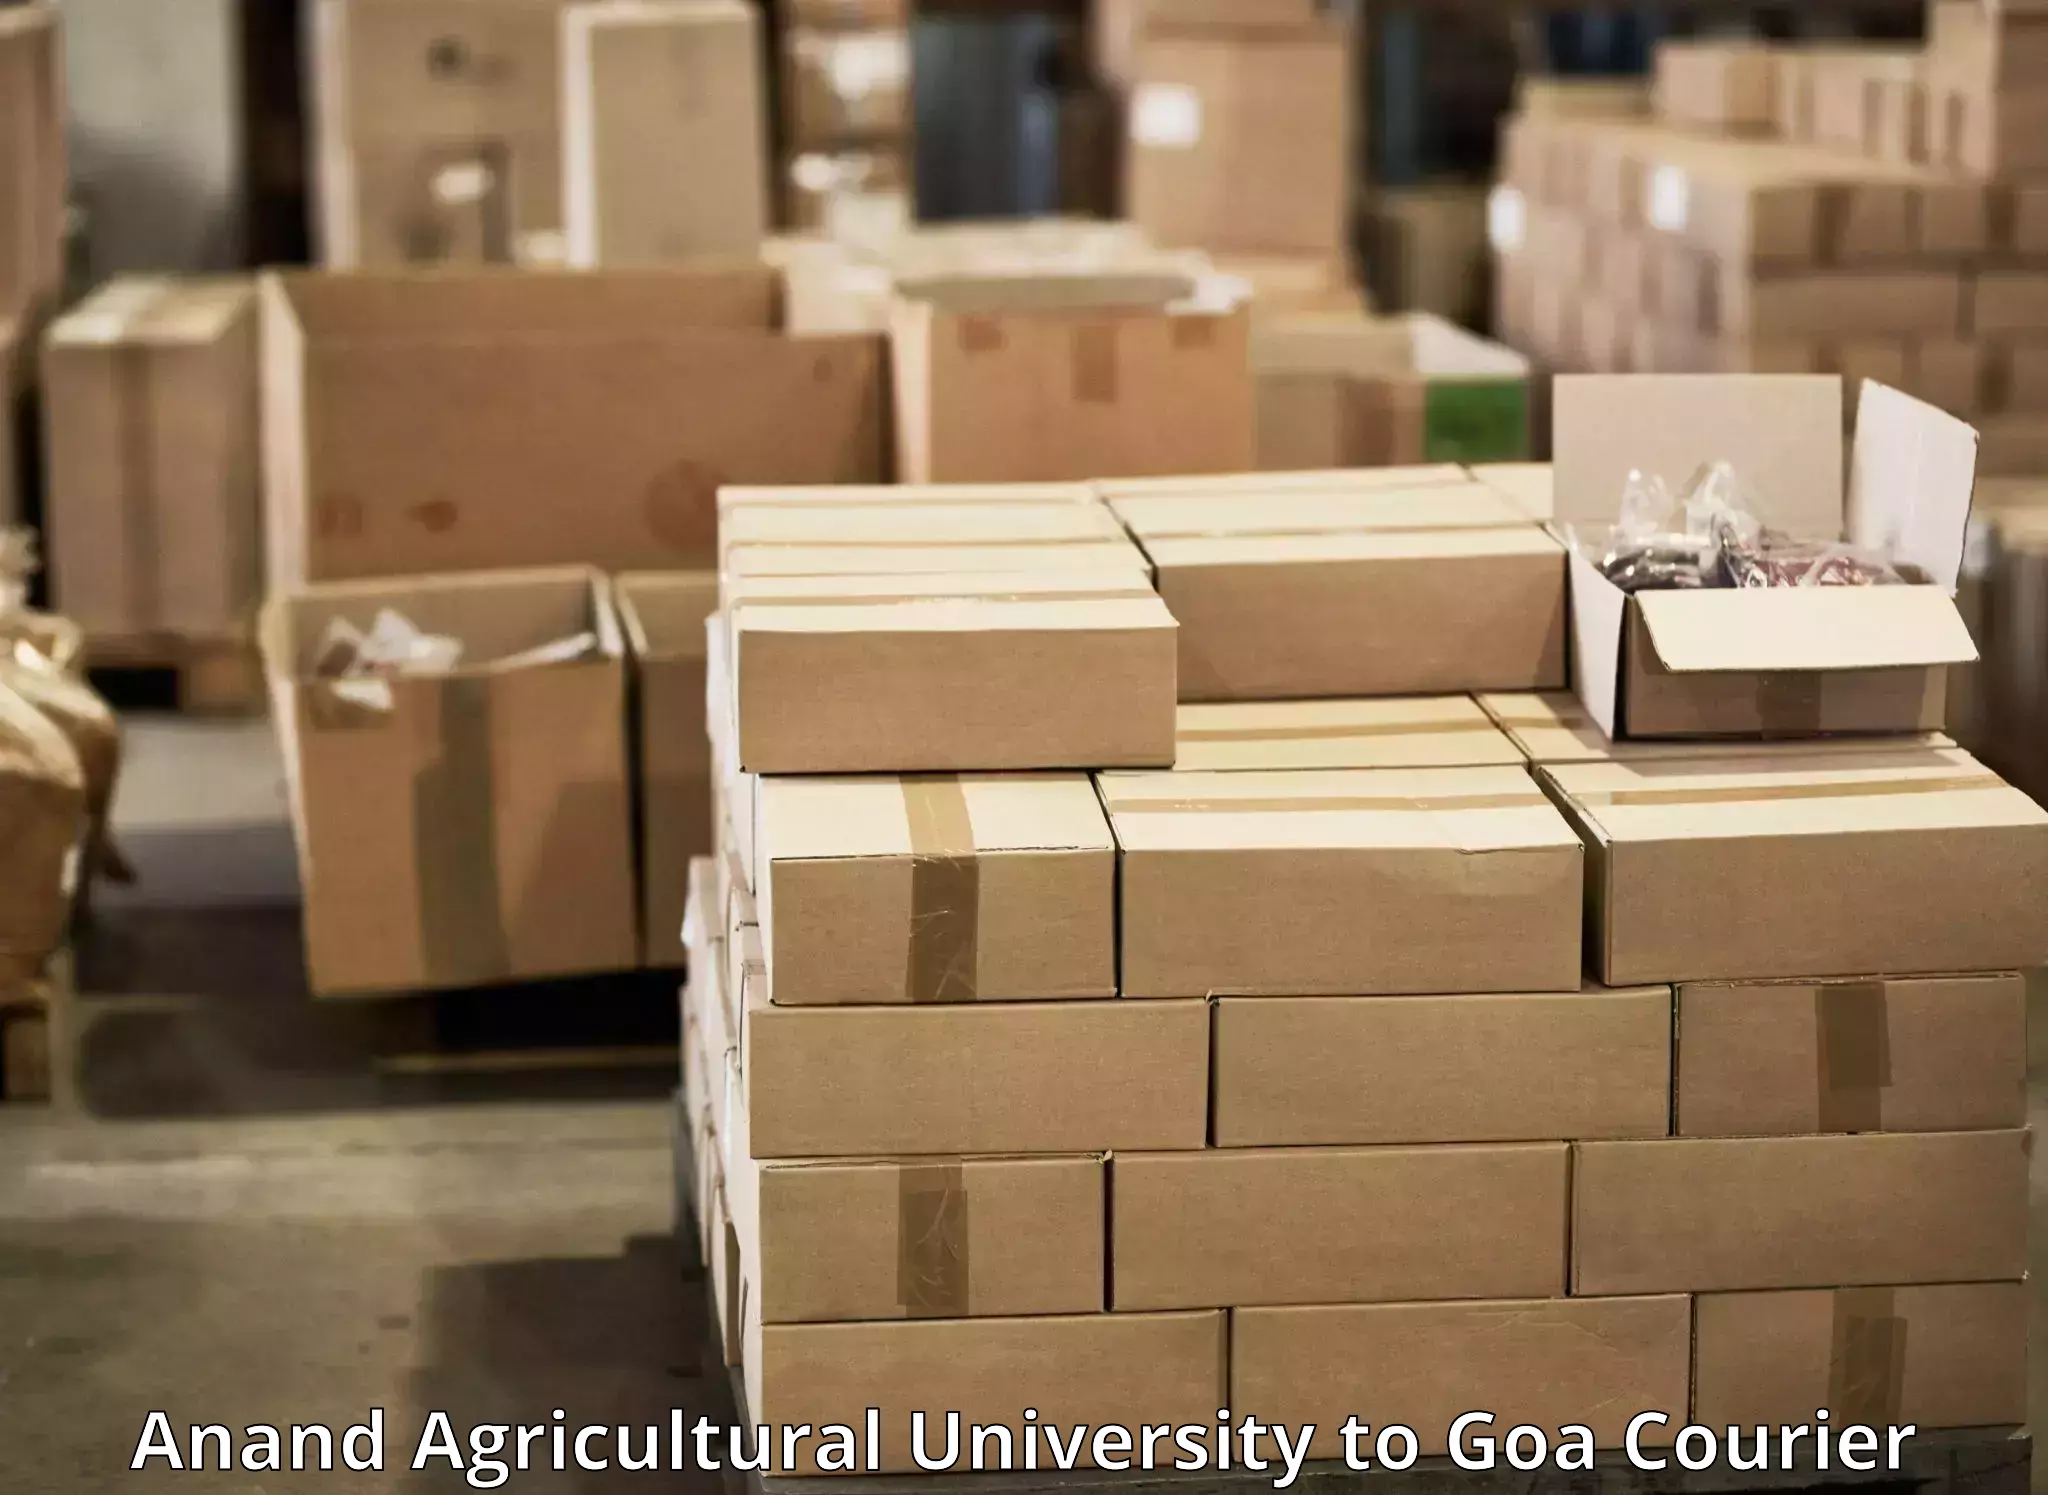 Express package handling Anand Agricultural University to Goa